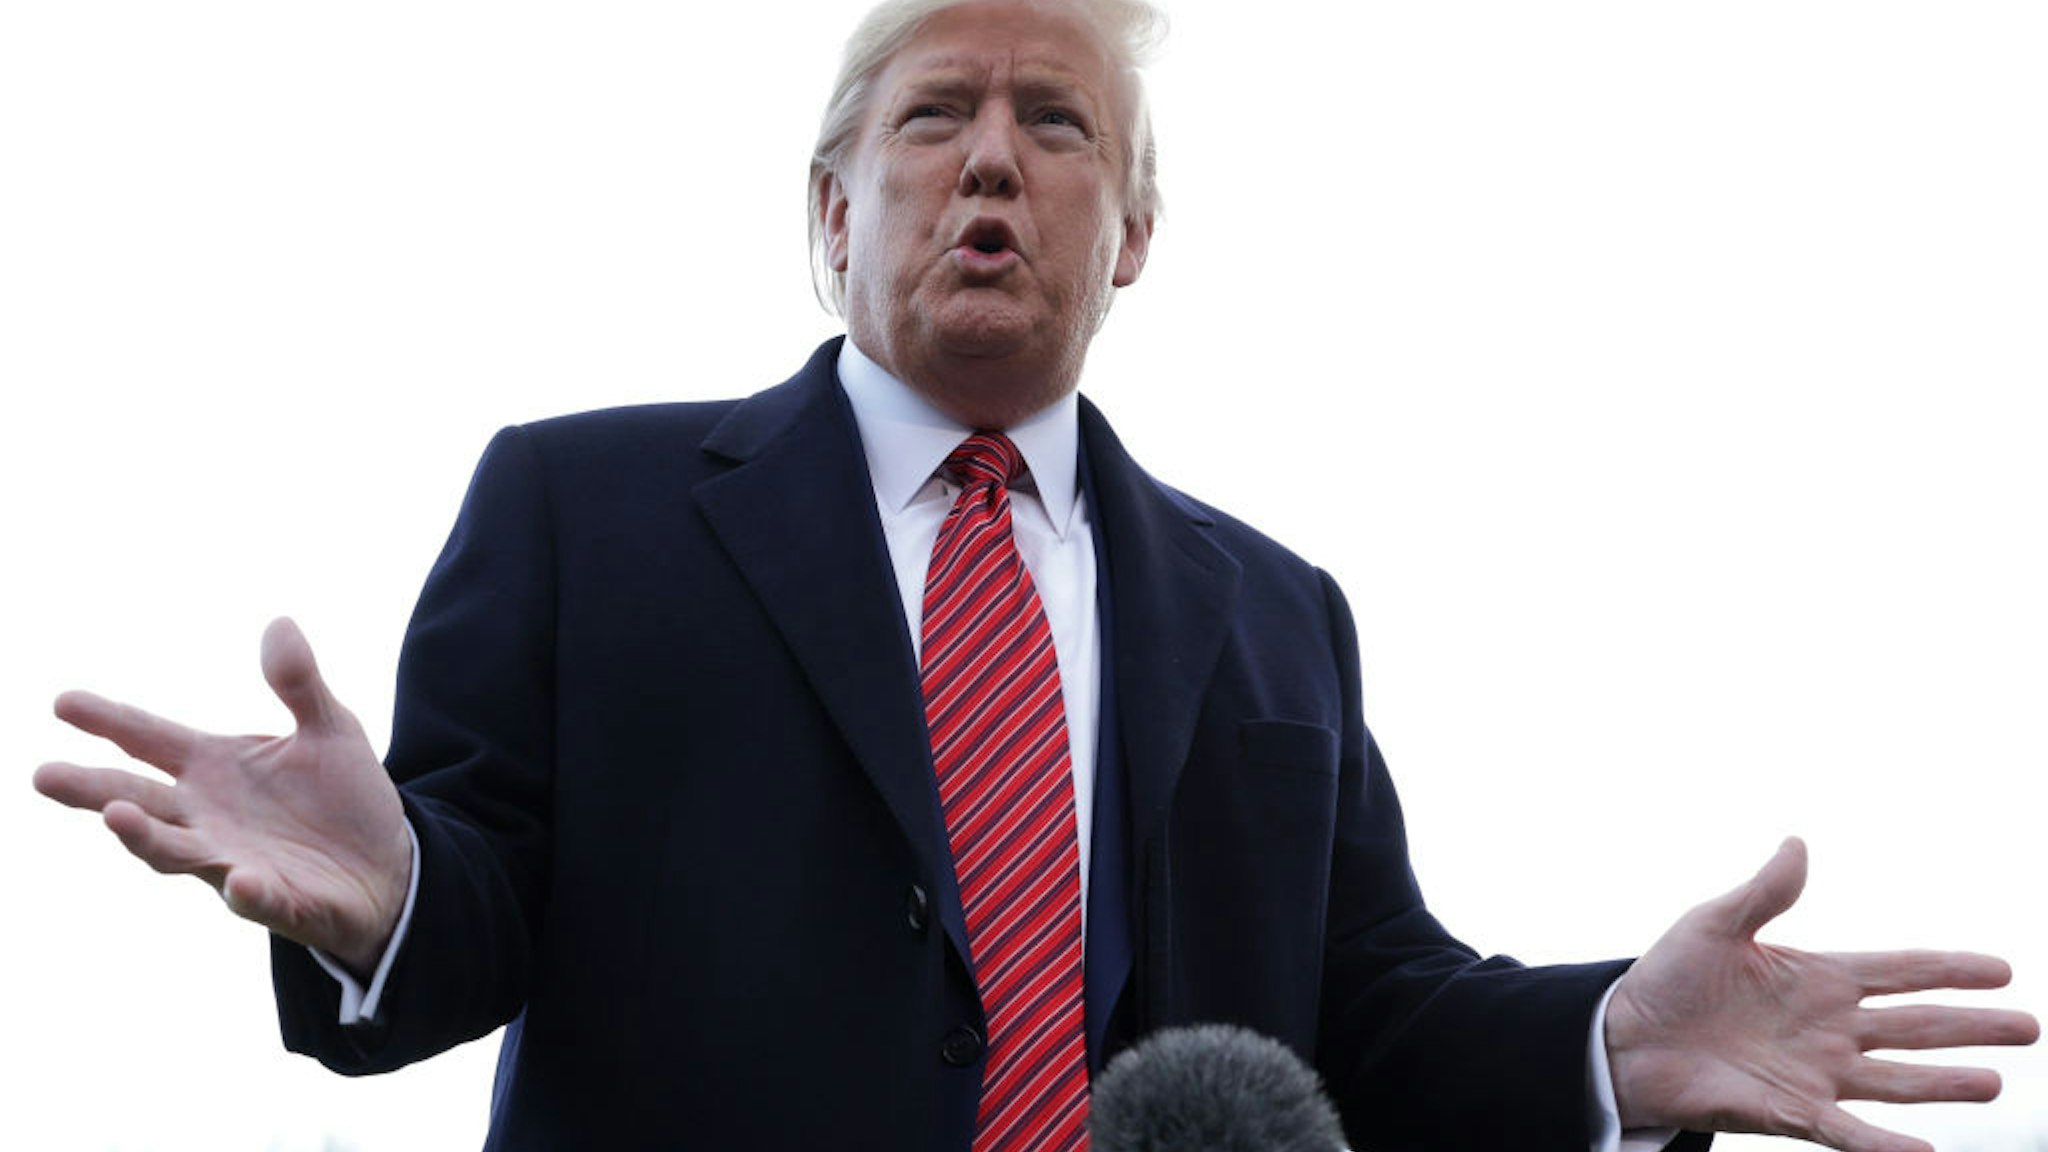 U.S. President Donald Trump speaks to members of the media prior to his departure from the White House February 28, 2020 in Washington, DC.